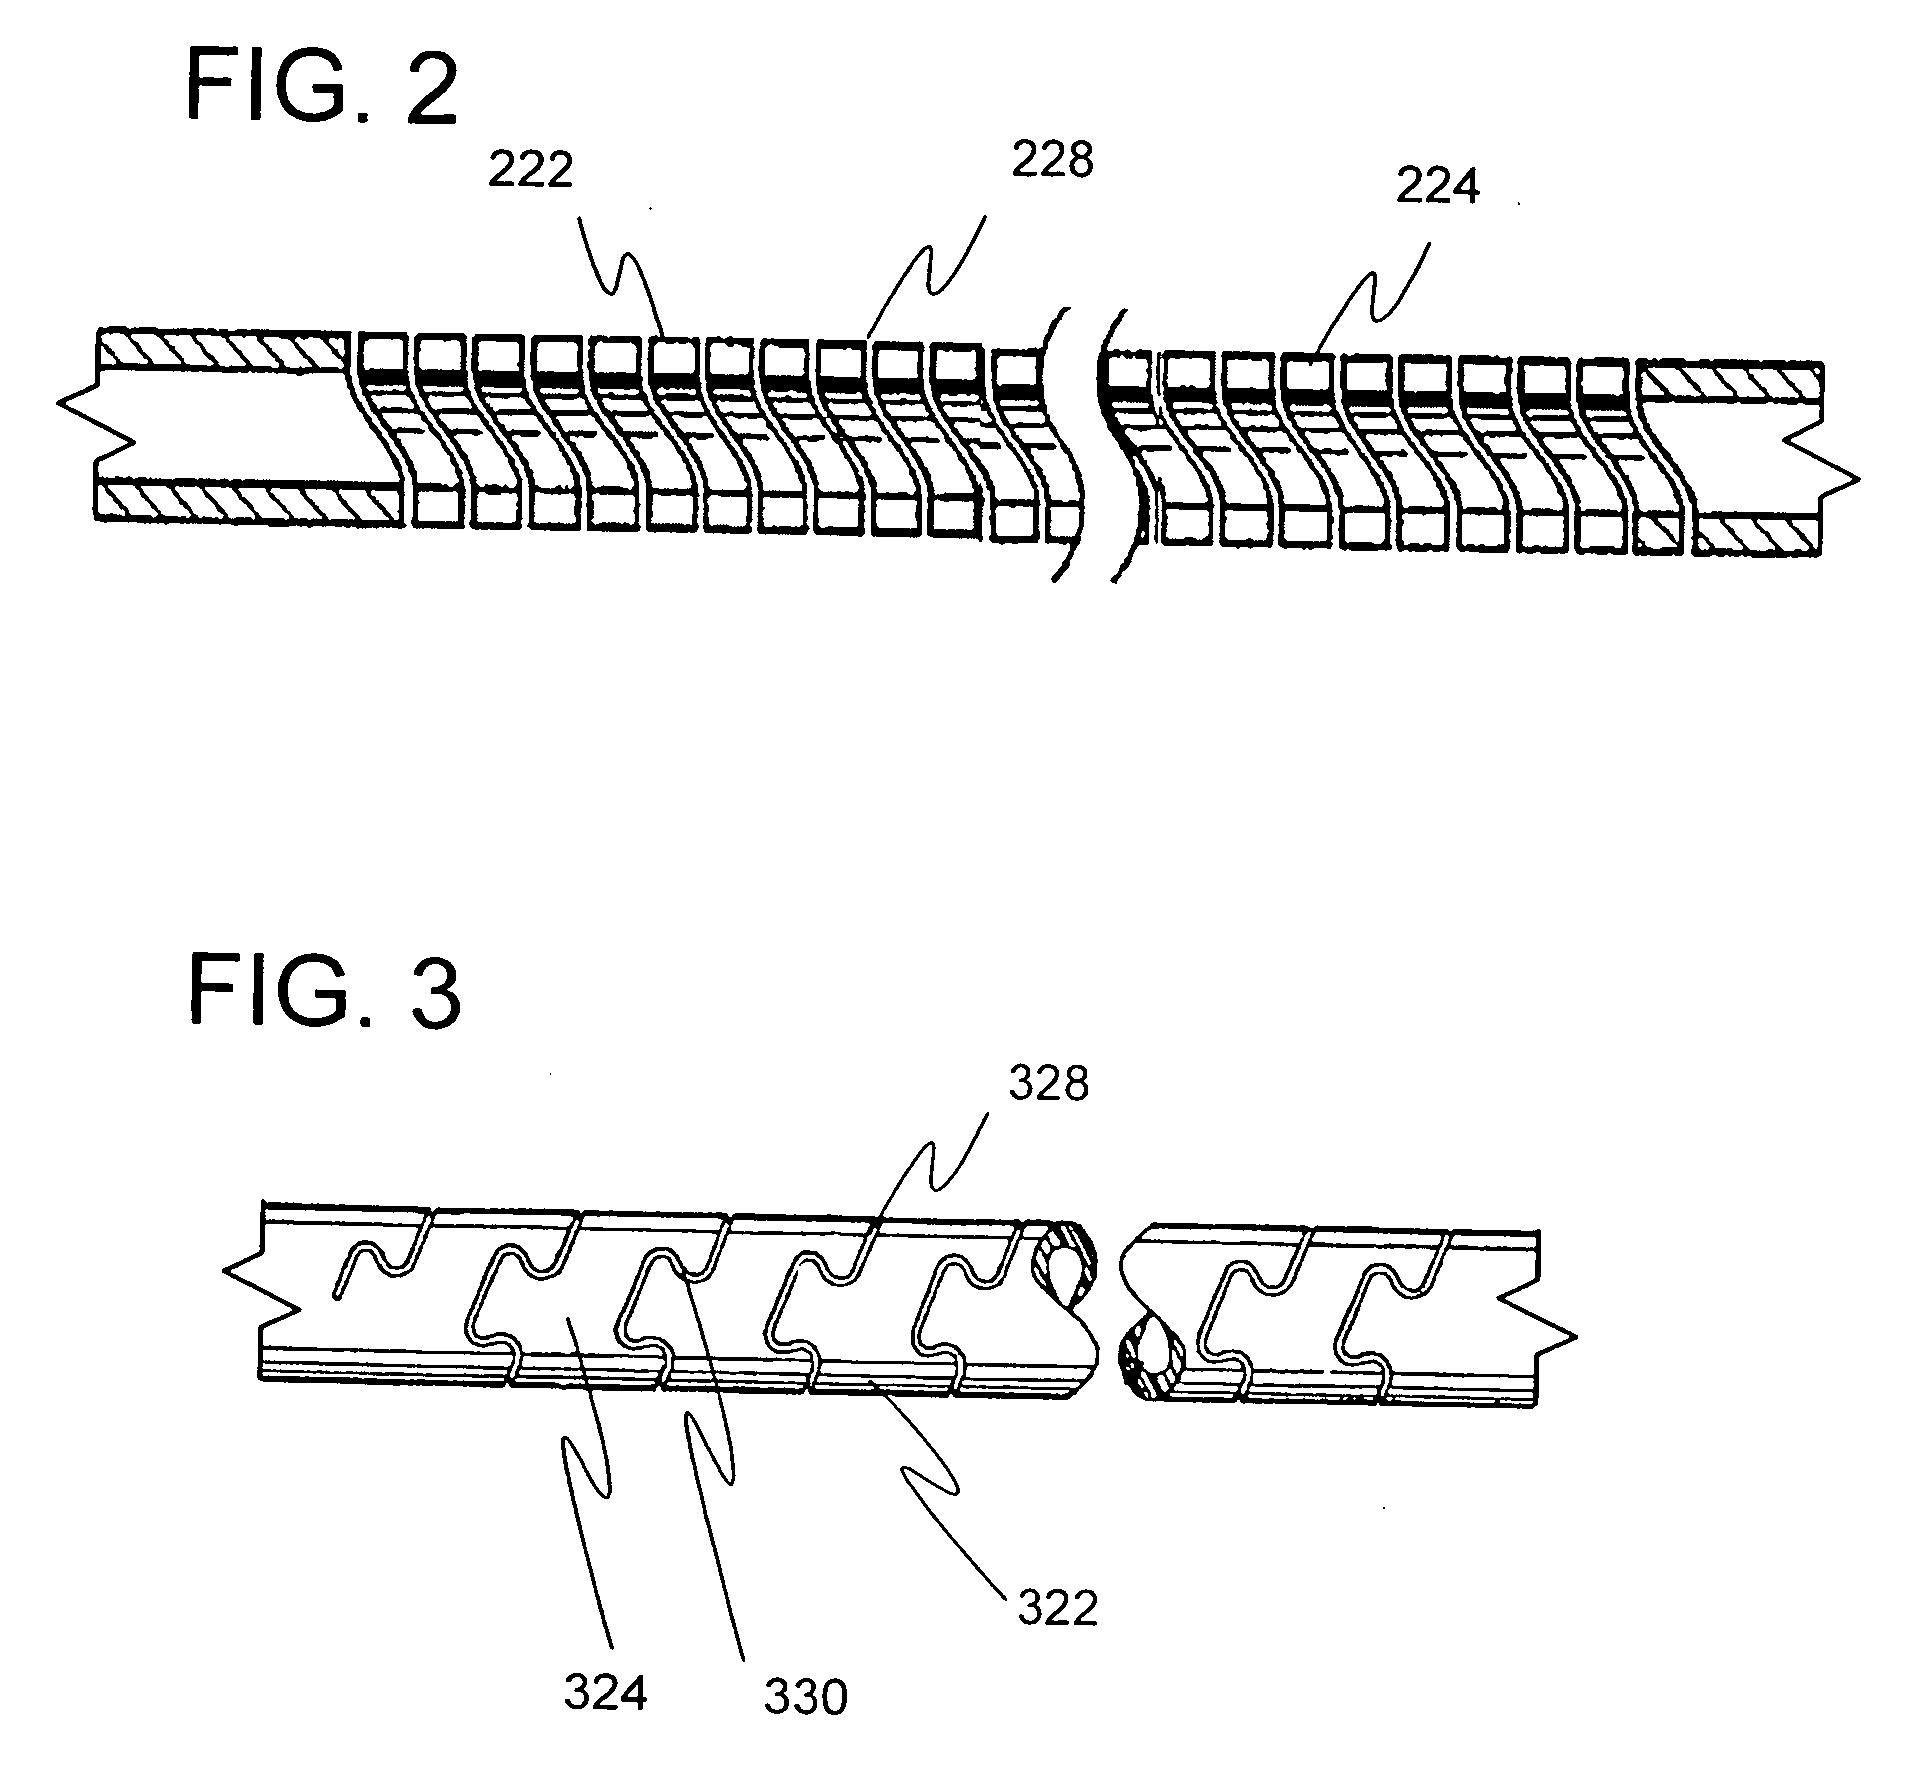 Flexible trephine and method of removing a bowed implant from a bone